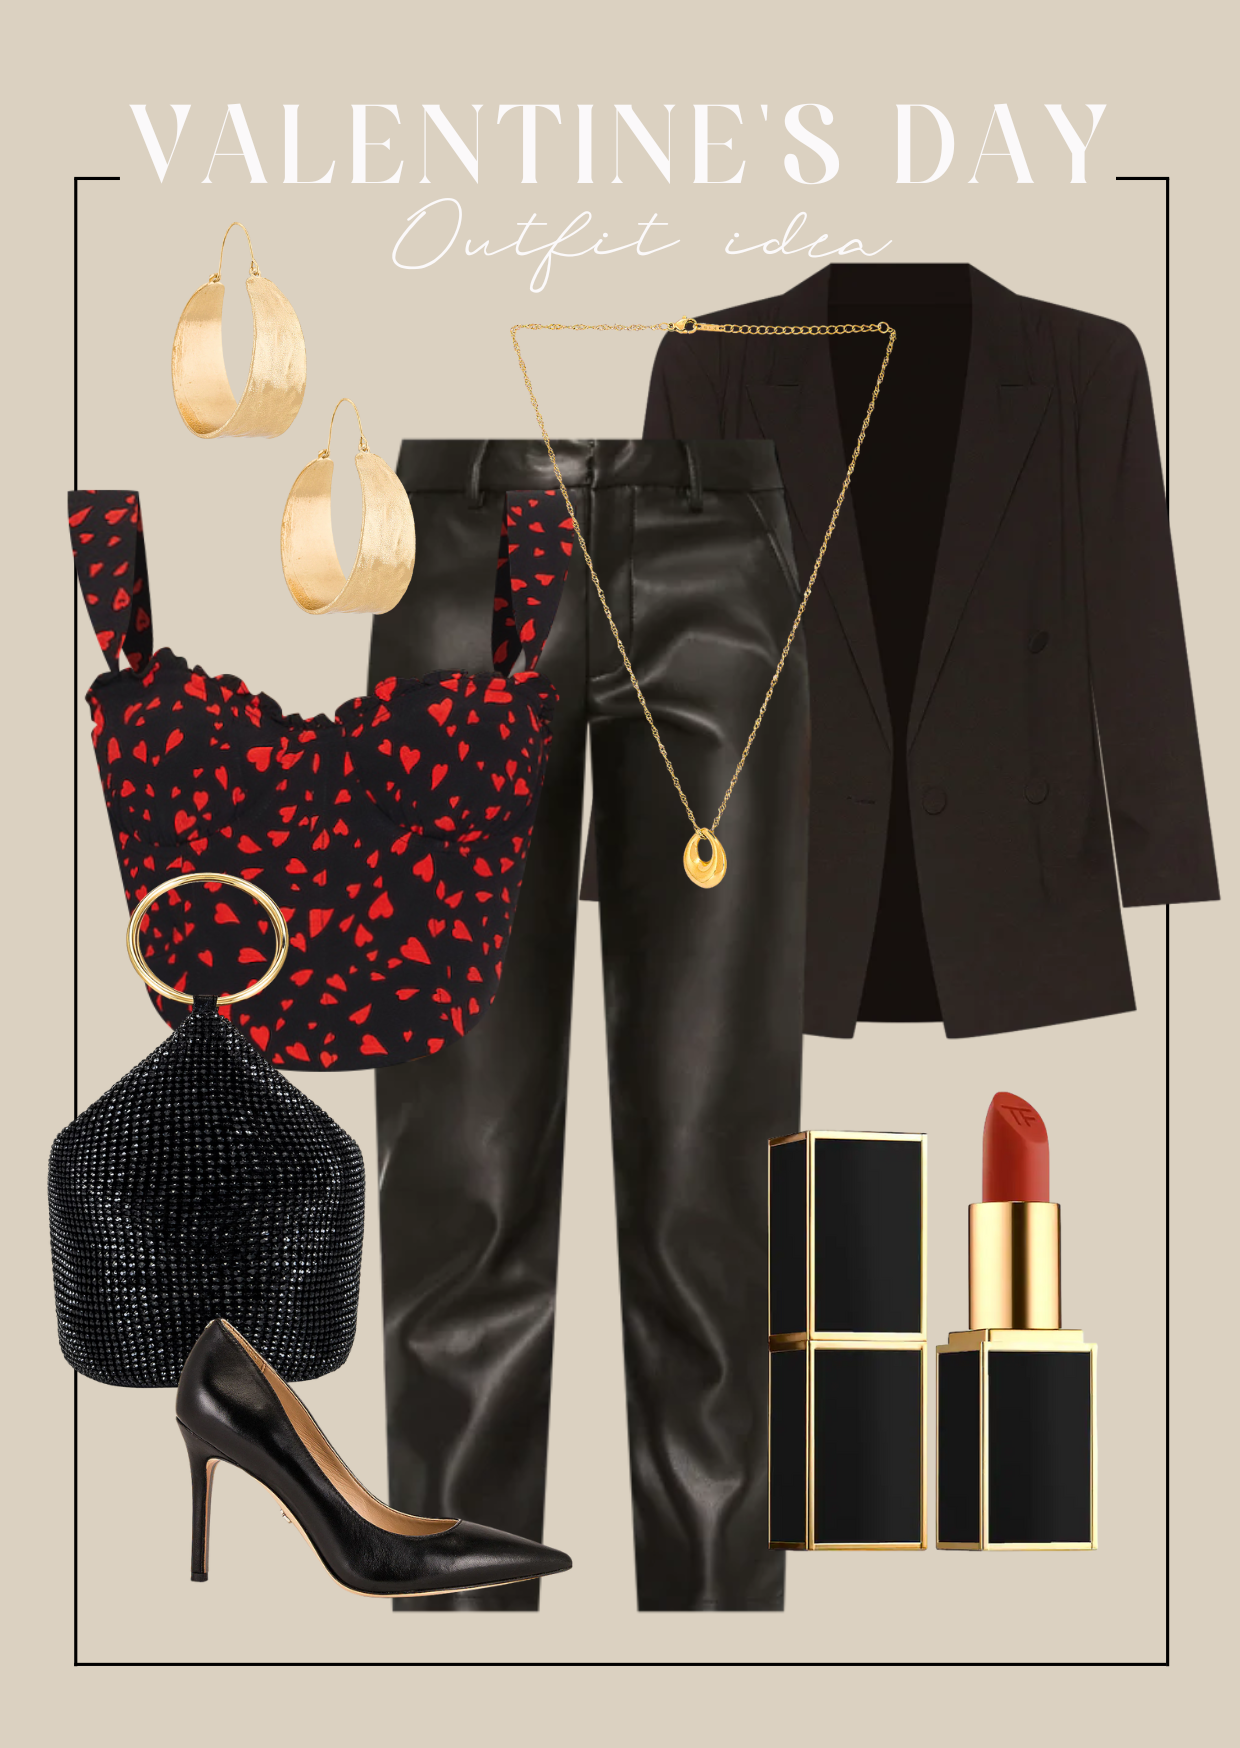 Outfit ideas for Valentine's Day via Revolve.